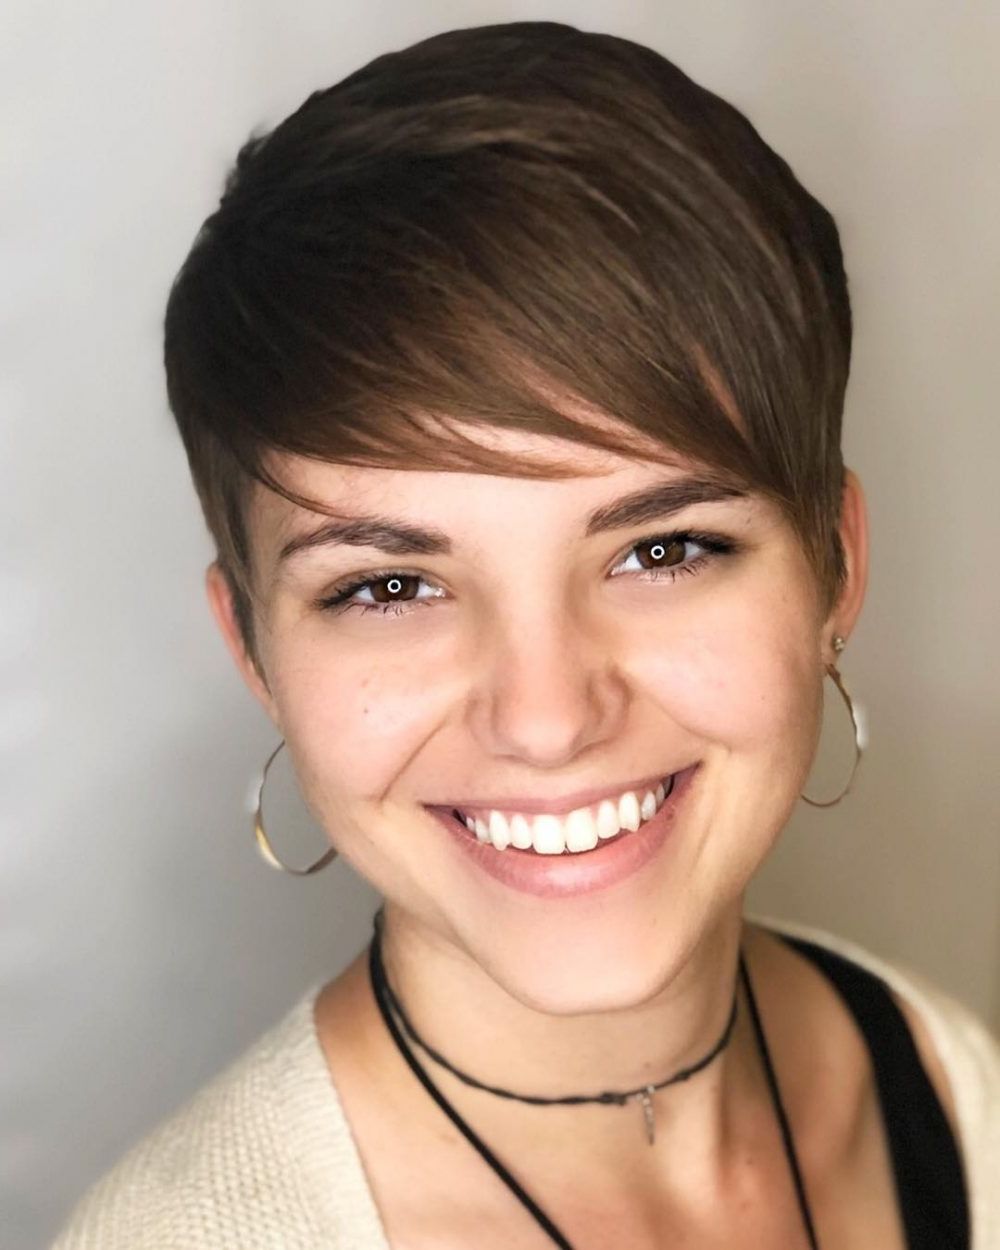 33 Flattering Short Hairstyles For Round Faces In 2018 Within Funky Short Haircuts For Round Faces (View 4 of 25)